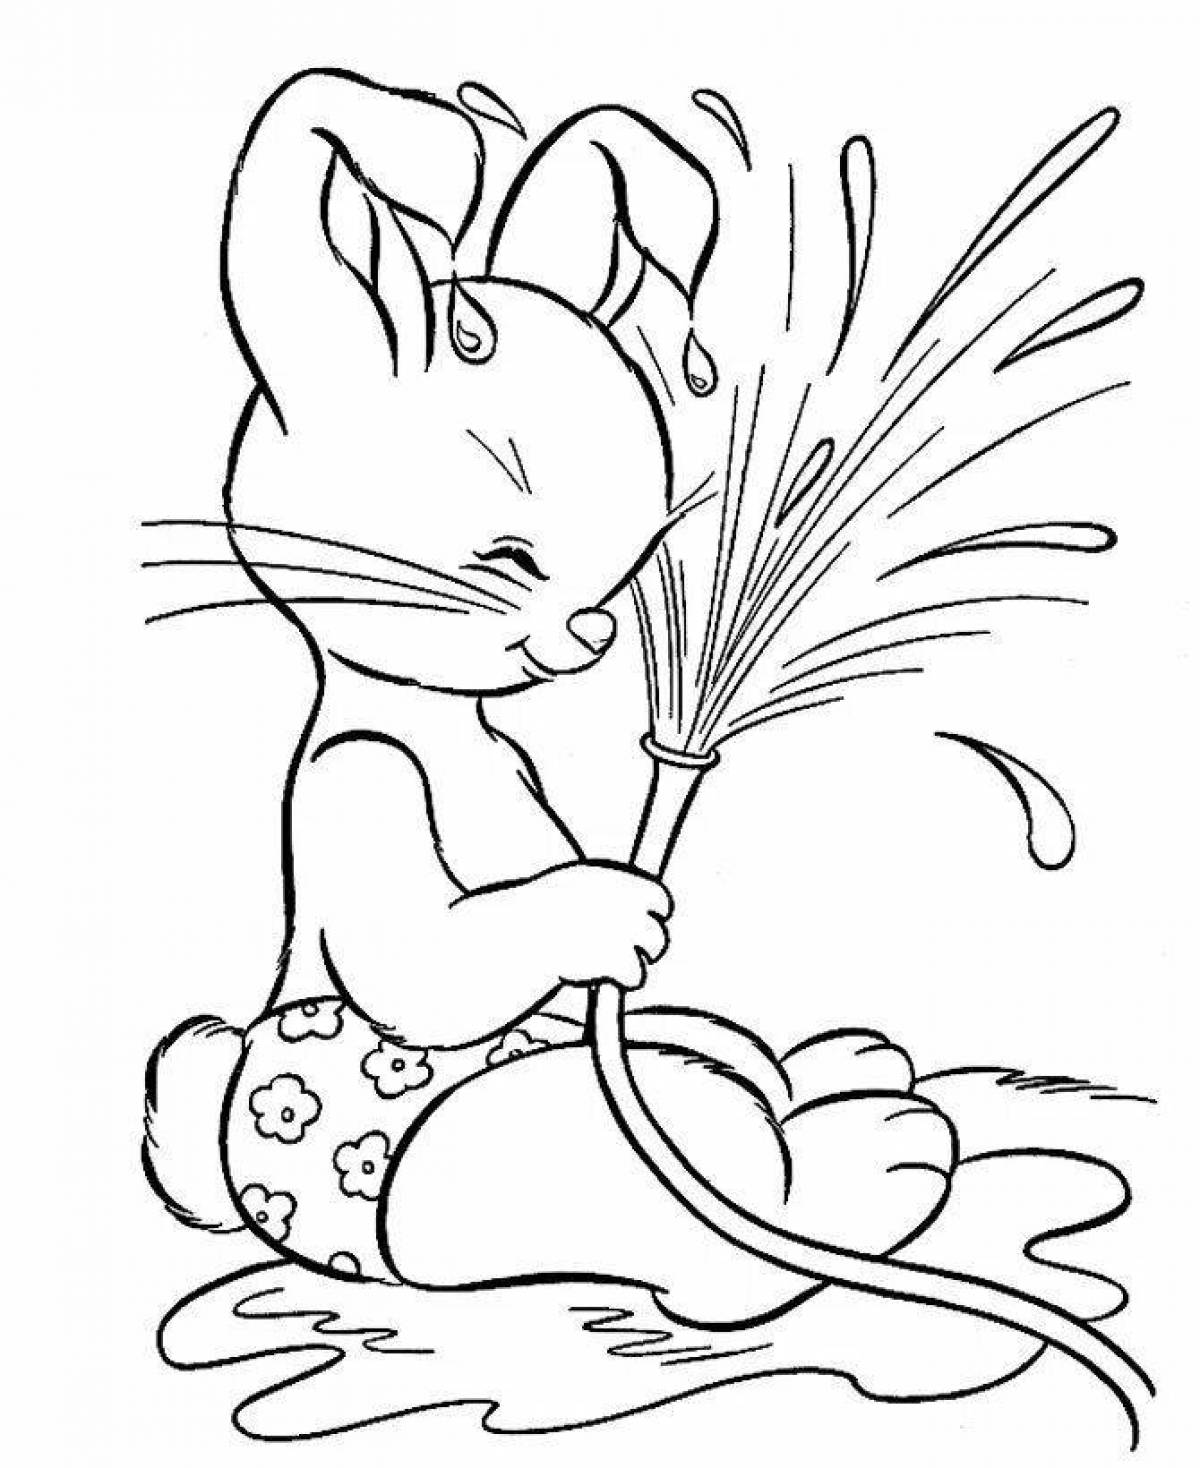 Coloring book exotic cat and hare